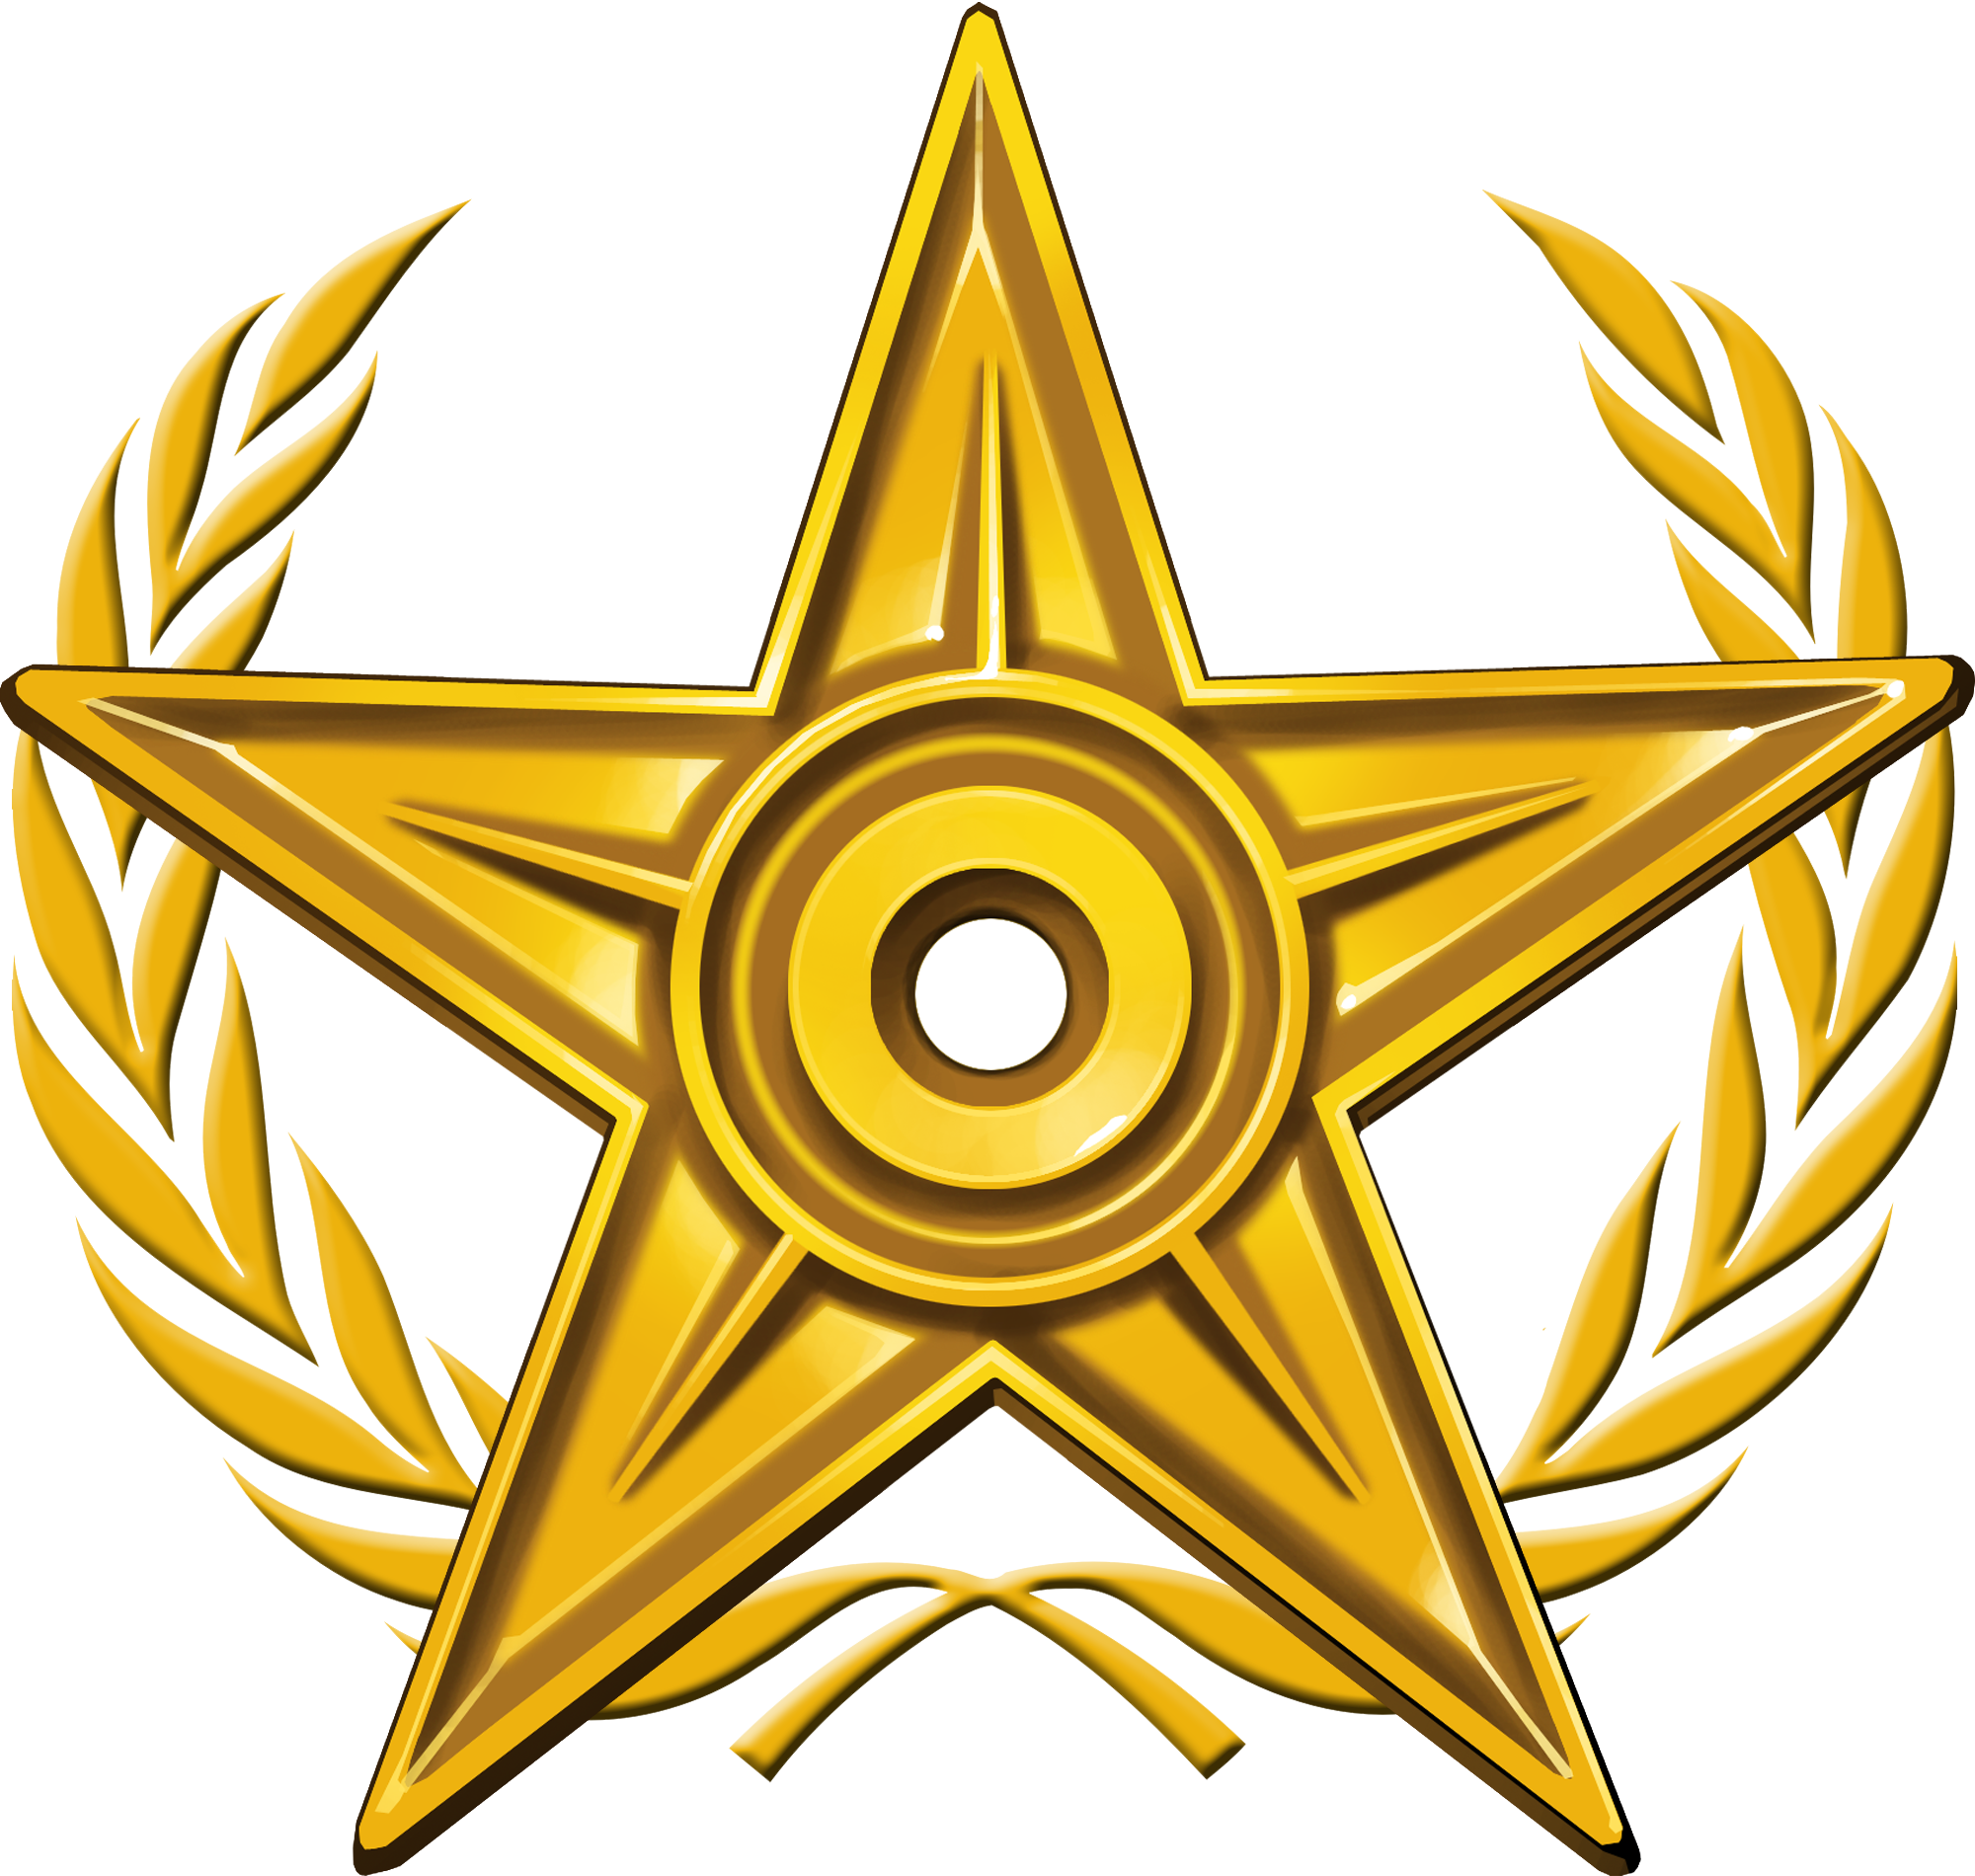 File Special Gold Barnstar Png Wikimedia Commons Star - Stockholm Model United Nations (2000x1900)